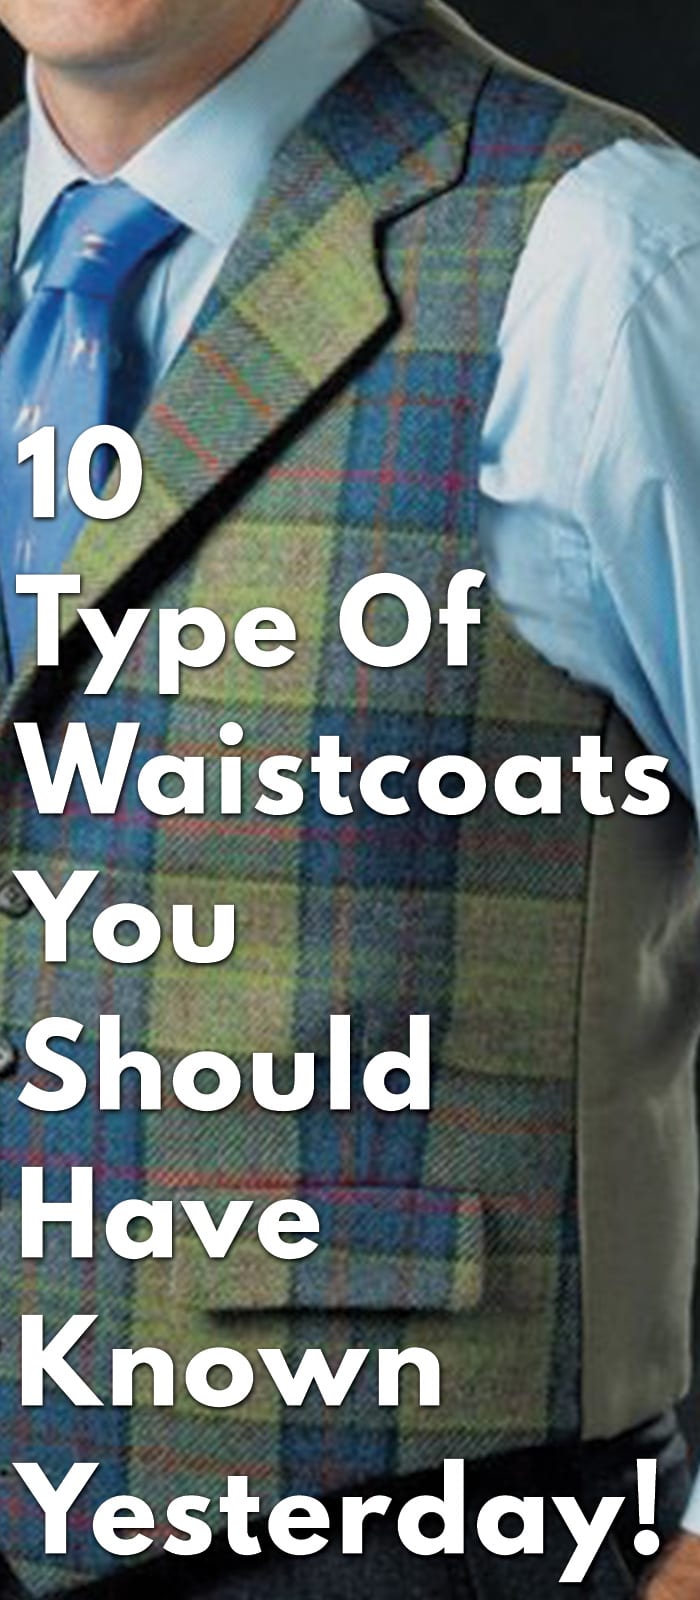 10-Type-Of-Waistcoats-You-Should-Have-Known-Yesterday!